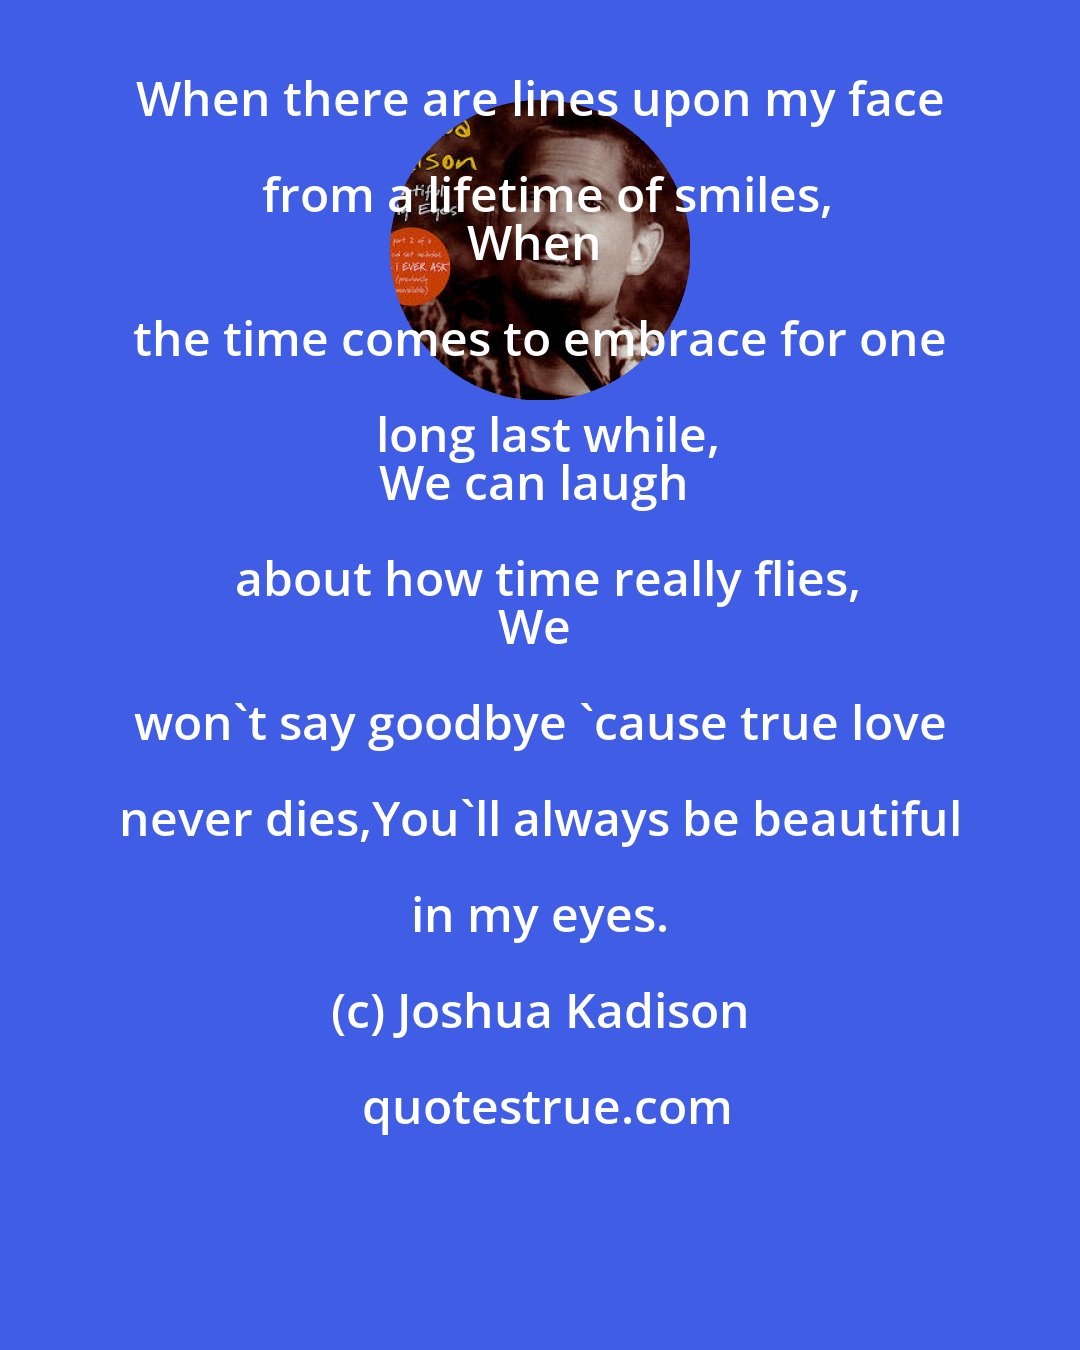 Joshua Kadison: When there are lines upon my face from a lifetime of smiles,
When the time comes to embrace for one long last while,
We can laugh about how time really flies,
We won't say goodbye 'cause true love never dies,You'll always be beautiful in my eyes.